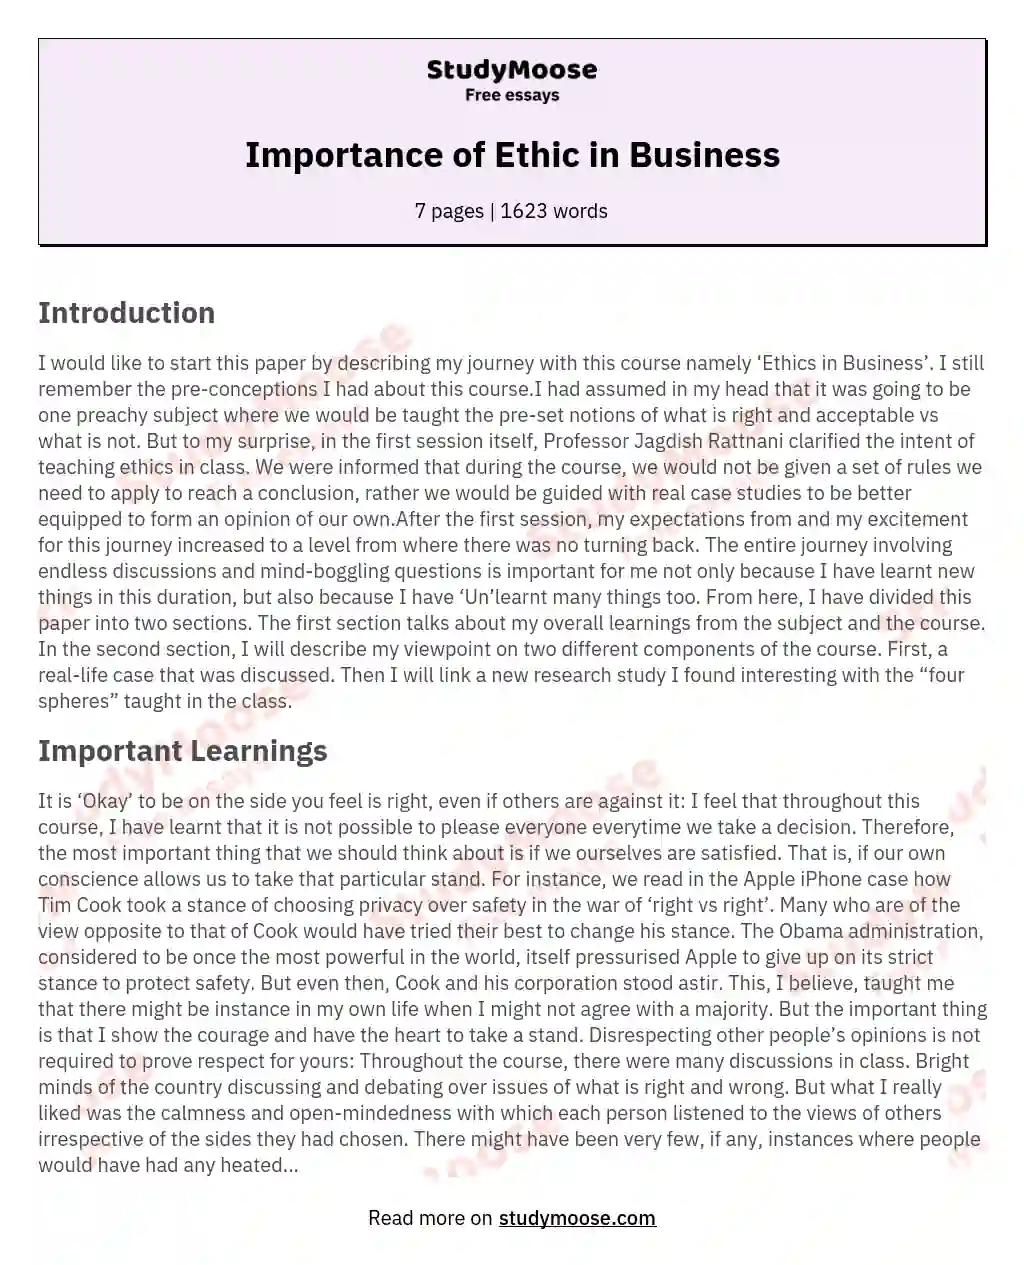 Importance of Ethic in Business